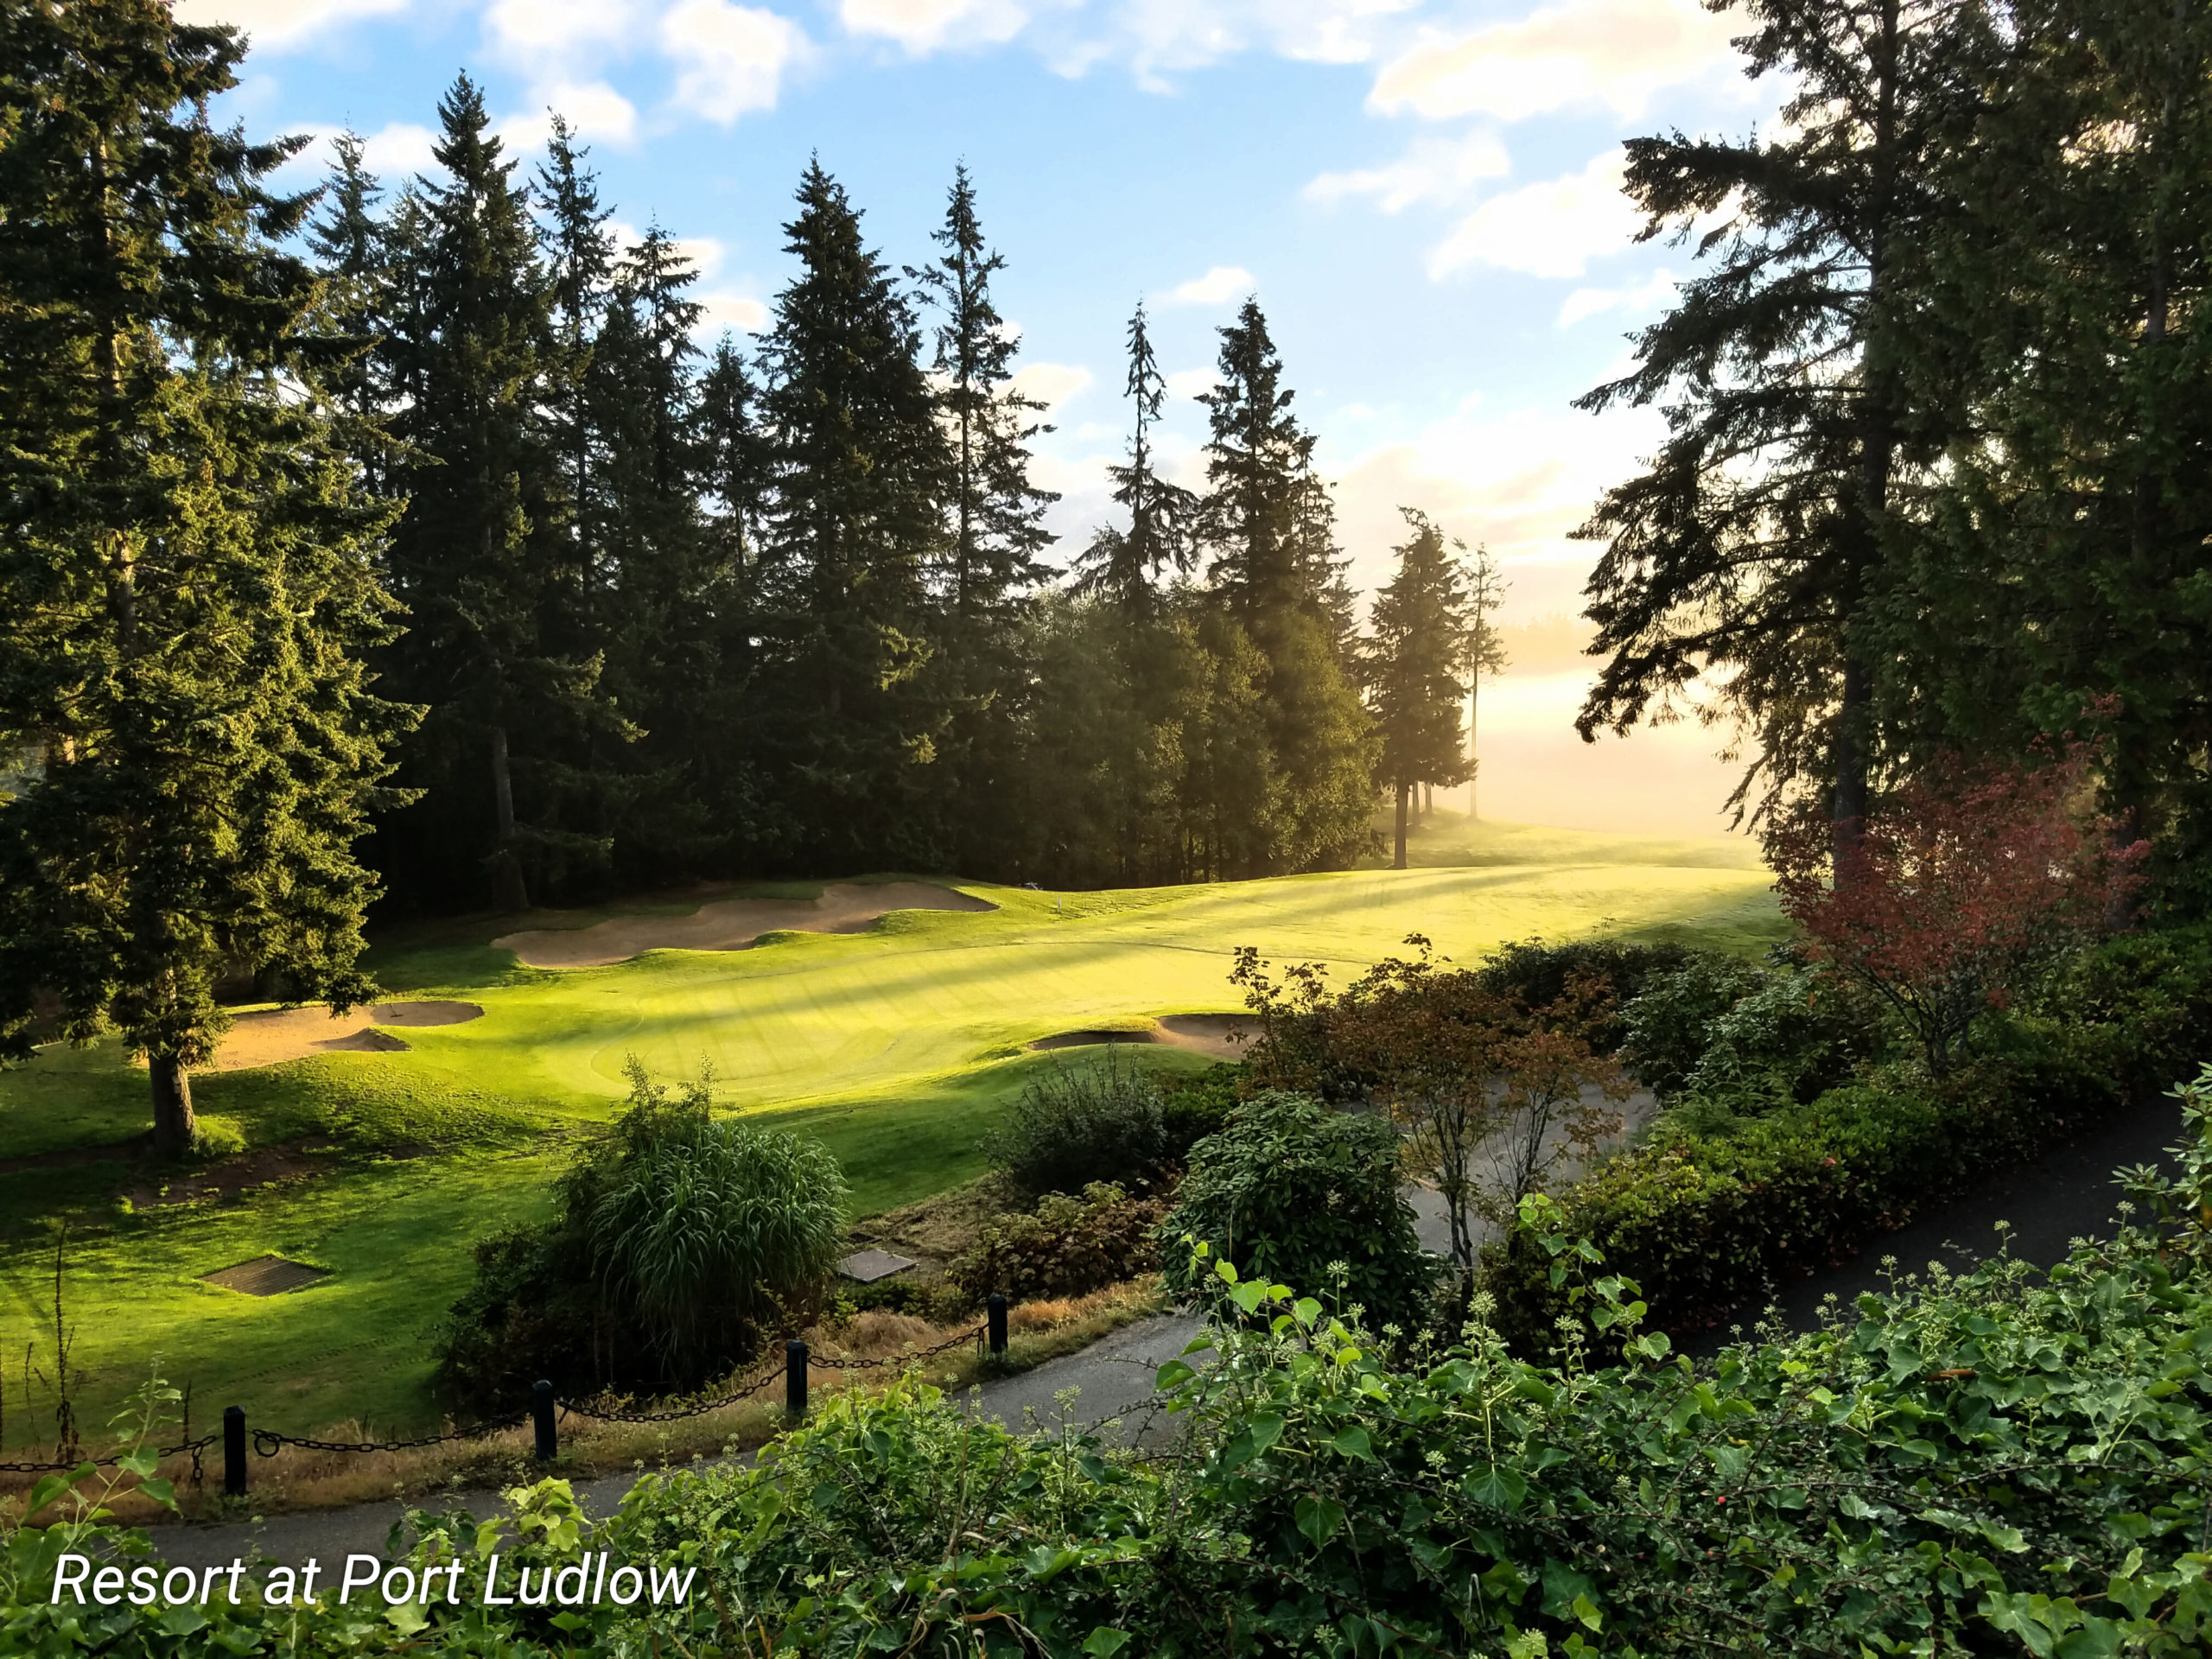 https://olympicpeninsula.org/wp-content/uploads/2018/08/9th-Hole-Credit-Resort-at-Port-Ludlow-1.jpg